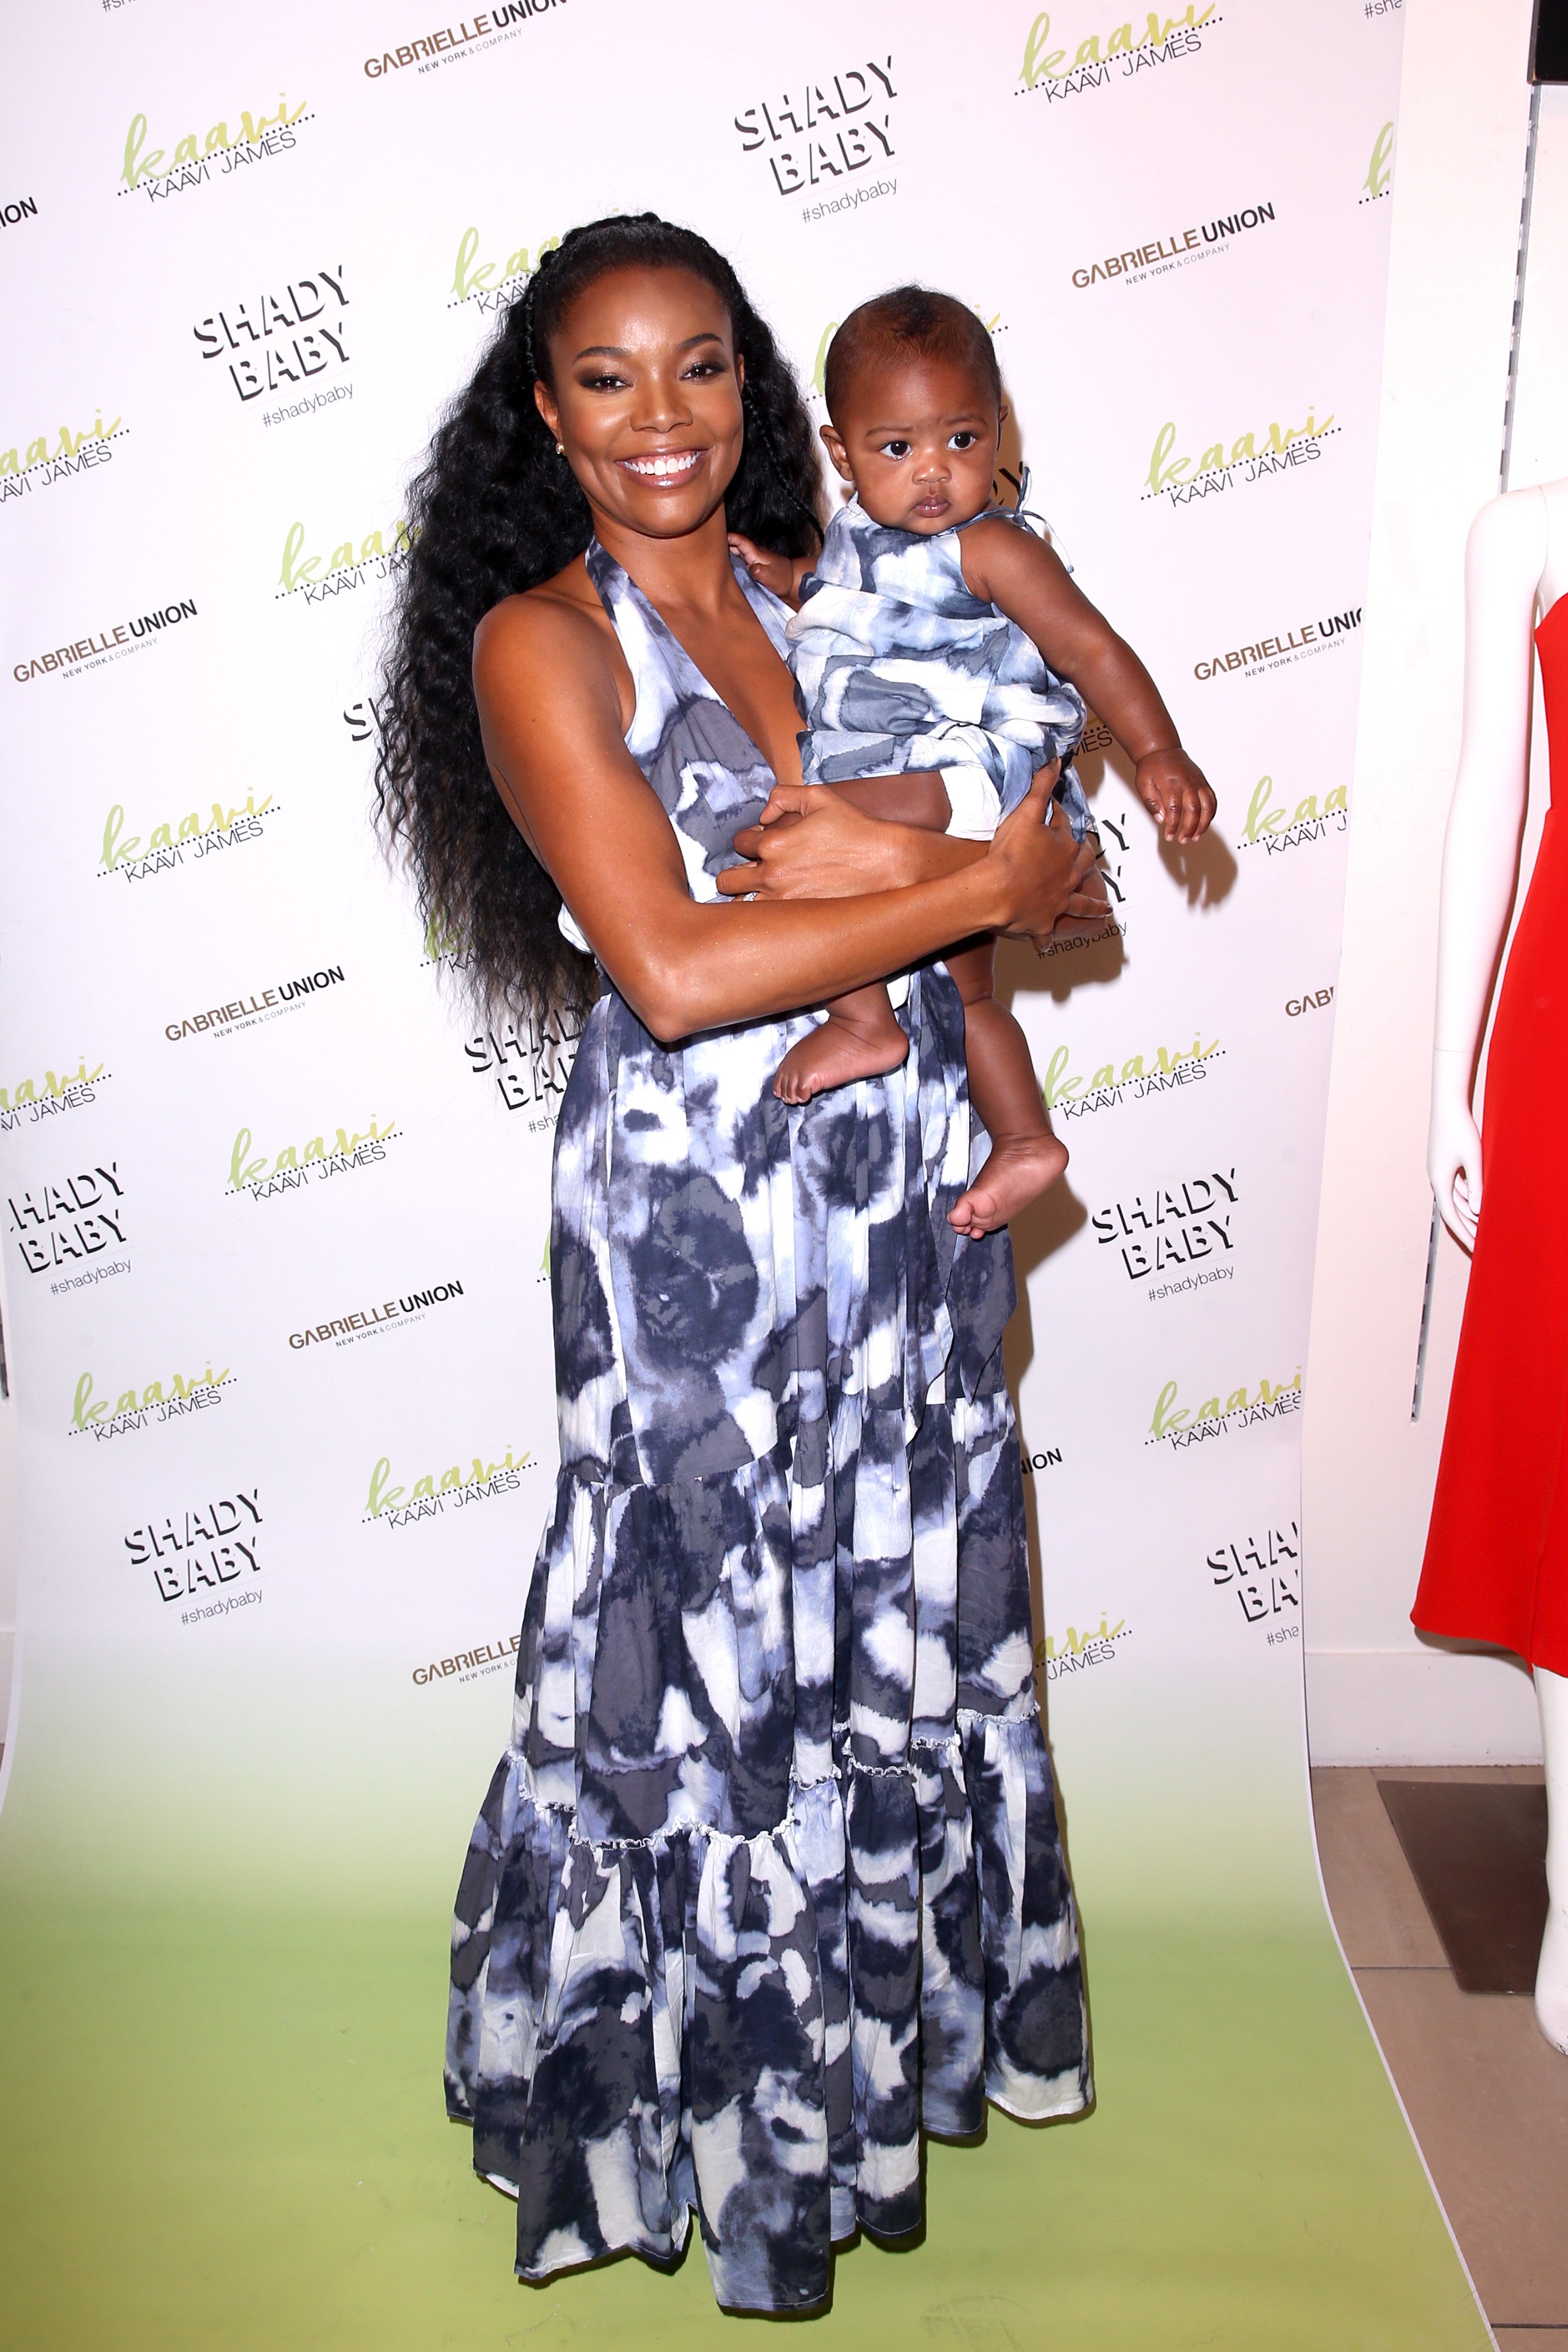 Gabrielle Union and her daughter Kaavia James Union Wade at the New York & Company Store in Burbank, CA, 2019. | Photo: Getty Images